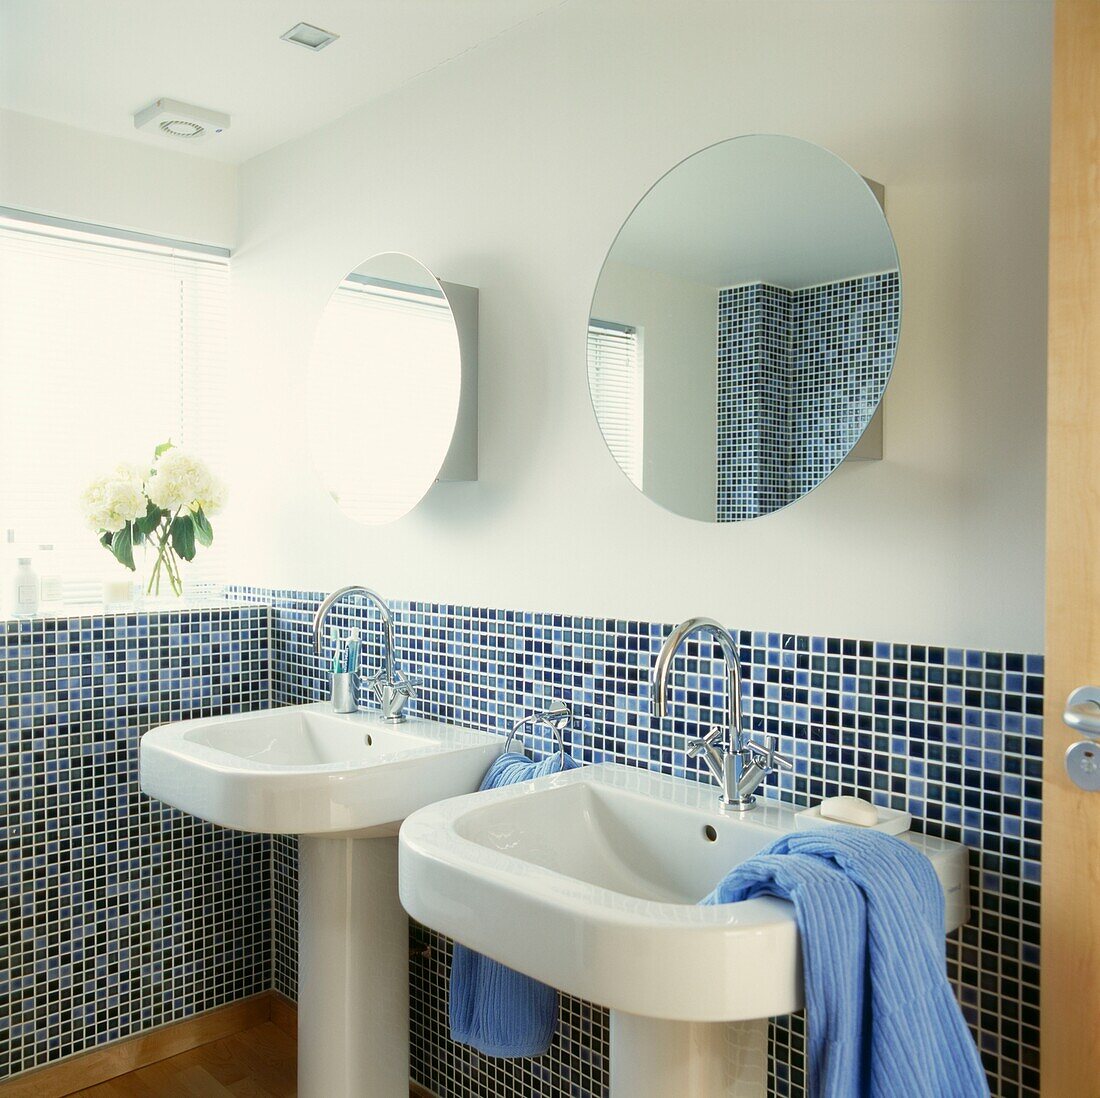 Double basins in sunlit mosaic tiled bathroom with circular mirrors